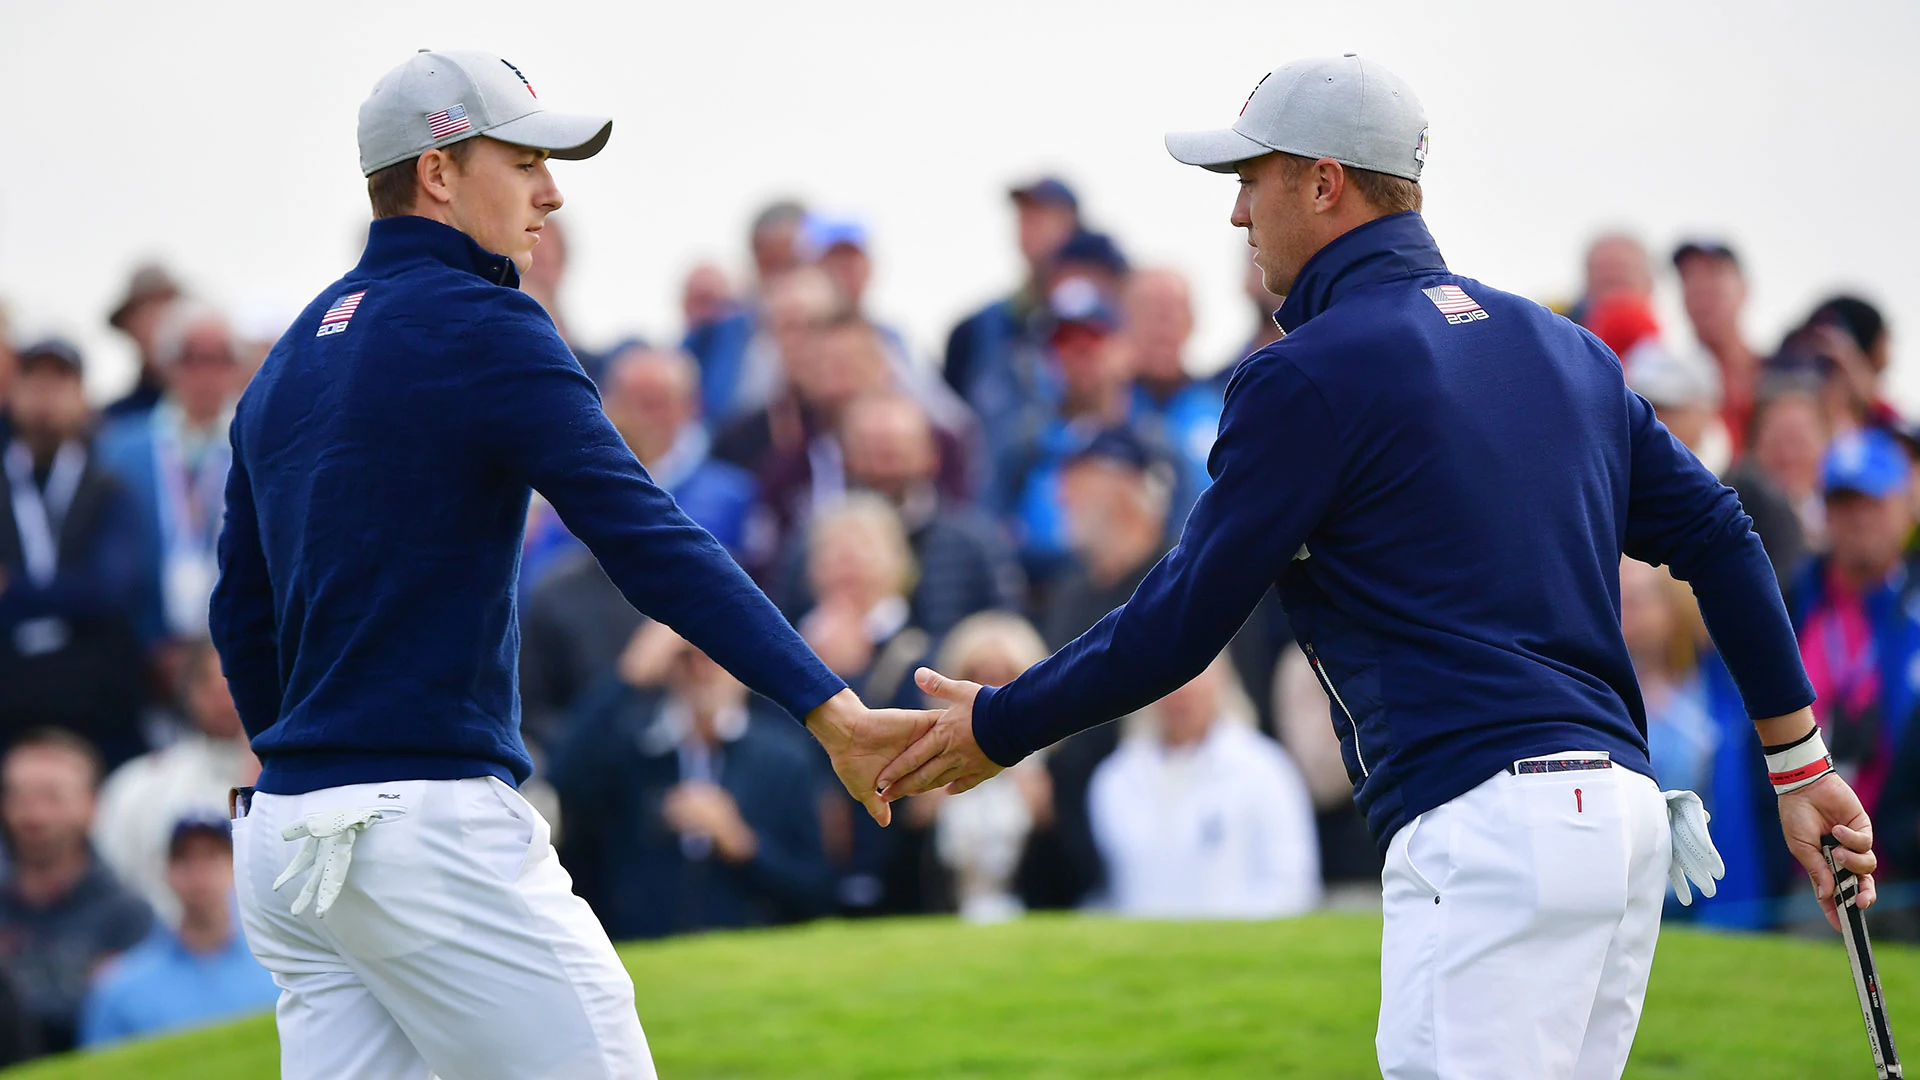 Thomas, Spieth together again in foursomes